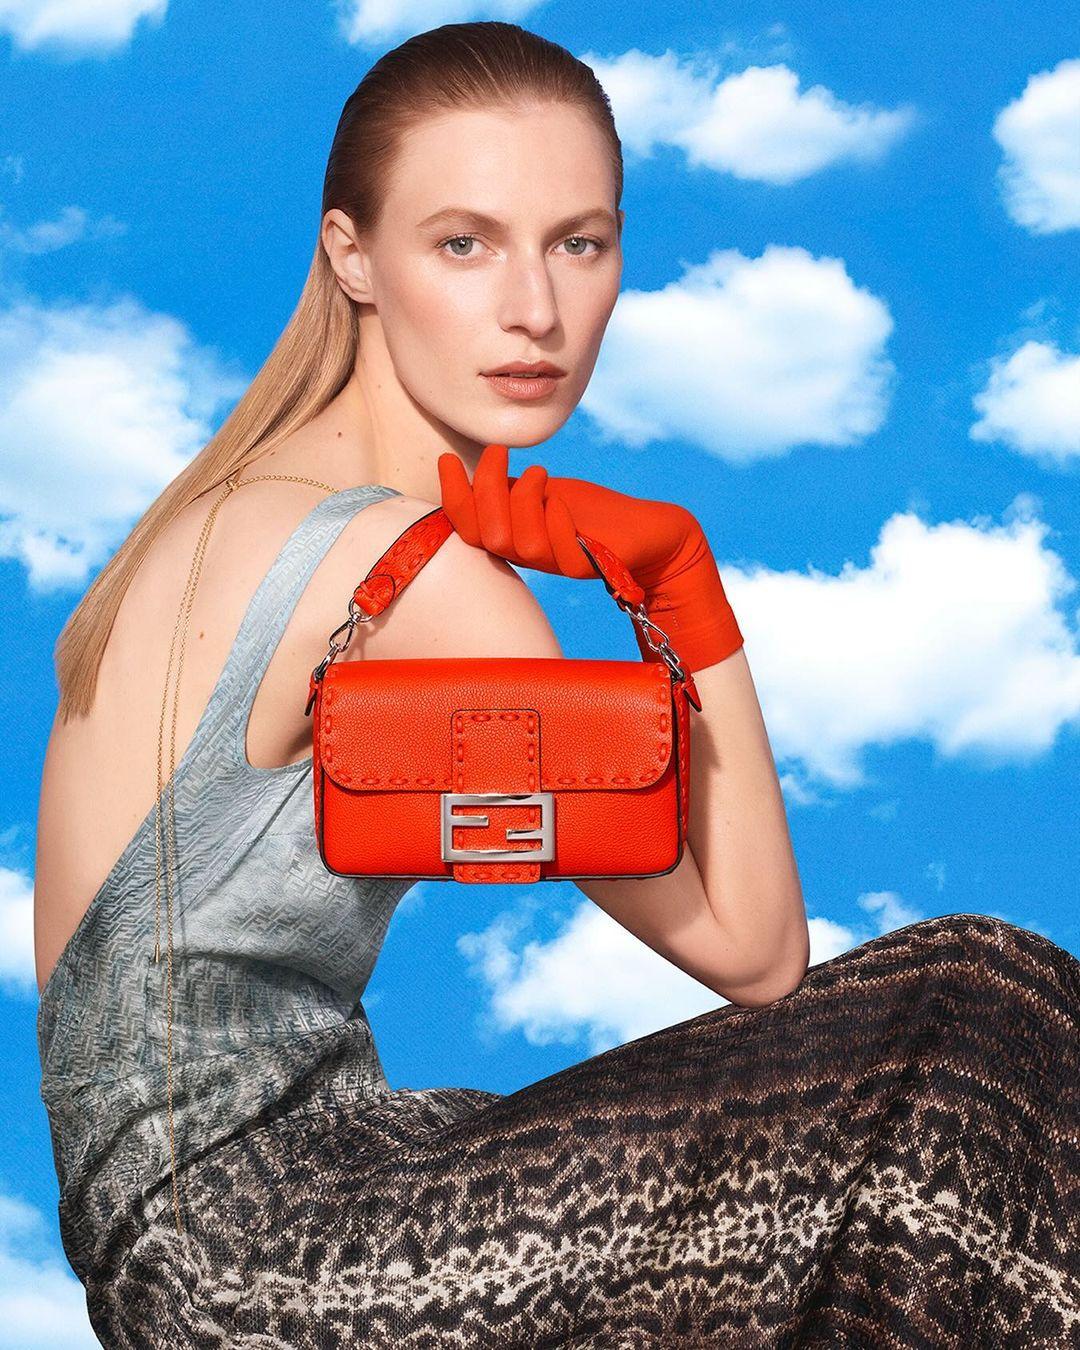 Washed silk in a karung print references Karl Lagerfeld’s Fendi Spring/Summer 1999 while the #FendiBaguette is embellished with #FendiSelleria stitching in a nod to the Maison’s very first bag line crafted nearly a century ago alongside Rome’s master saddlers.

The #FendiSS24 collection launches worldwide on 8 February.

Artistic Director of Couture and Womenswear: @mrkimjones 
Artistic Director of Accessories and Menswear: @silviaventurinifendi ​
Artistic Director of Jewellery: @delfinadelettrez​

Creative Direction: @ronnie.cooke.newhouse @karlbolander

Styling: @rizzo_olivier
Hair: @guidopalau
Makeup: @patmcgrathreal

Casting: @shelleydurkancasting
Model: @isitnobis

Photography: @stevenmeiselofficial

Set Design: @maryhoward_setdesign